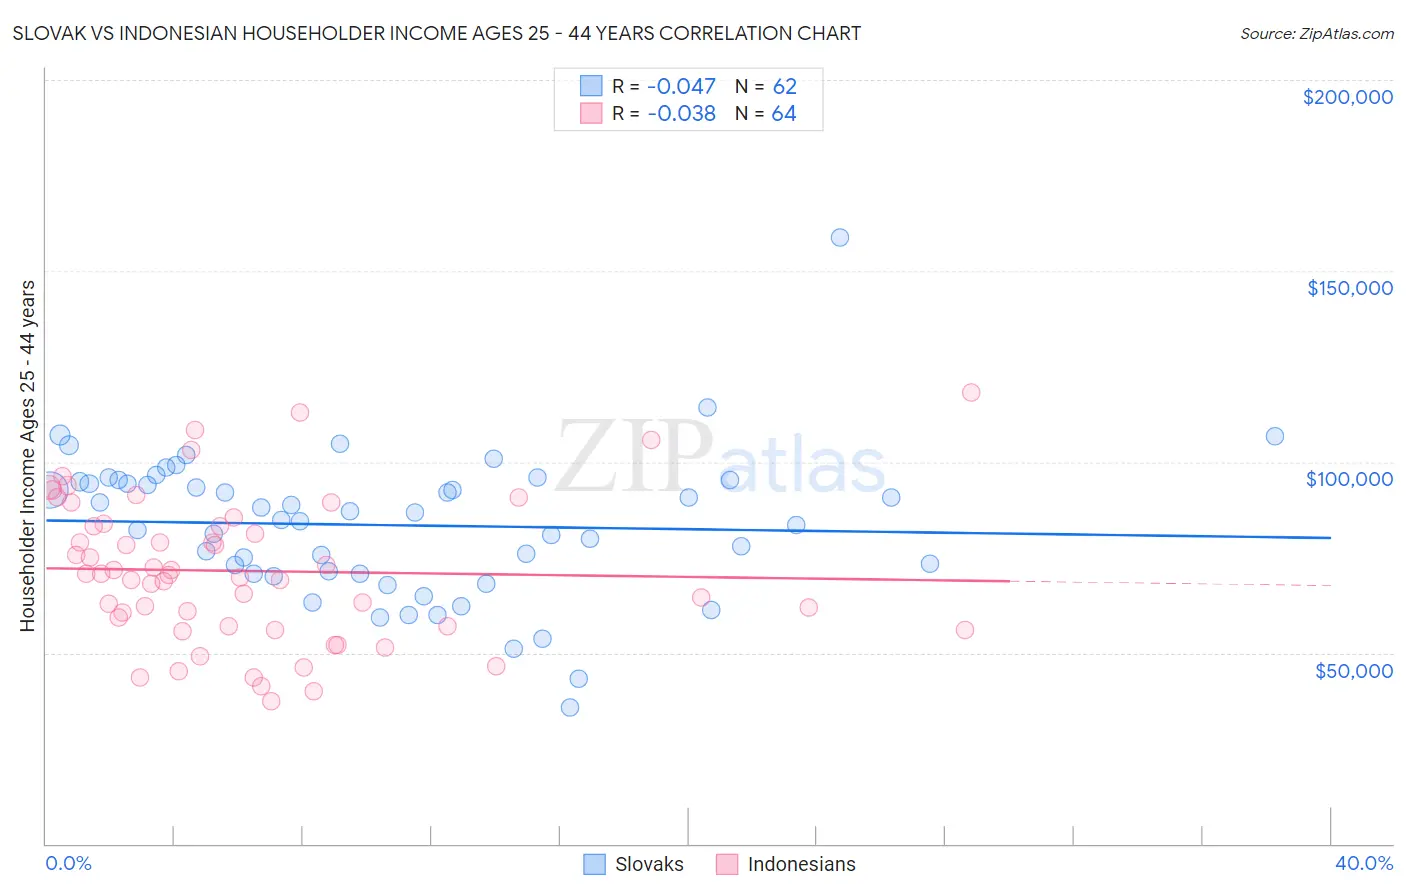 Slovak vs Indonesian Householder Income Ages 25 - 44 years